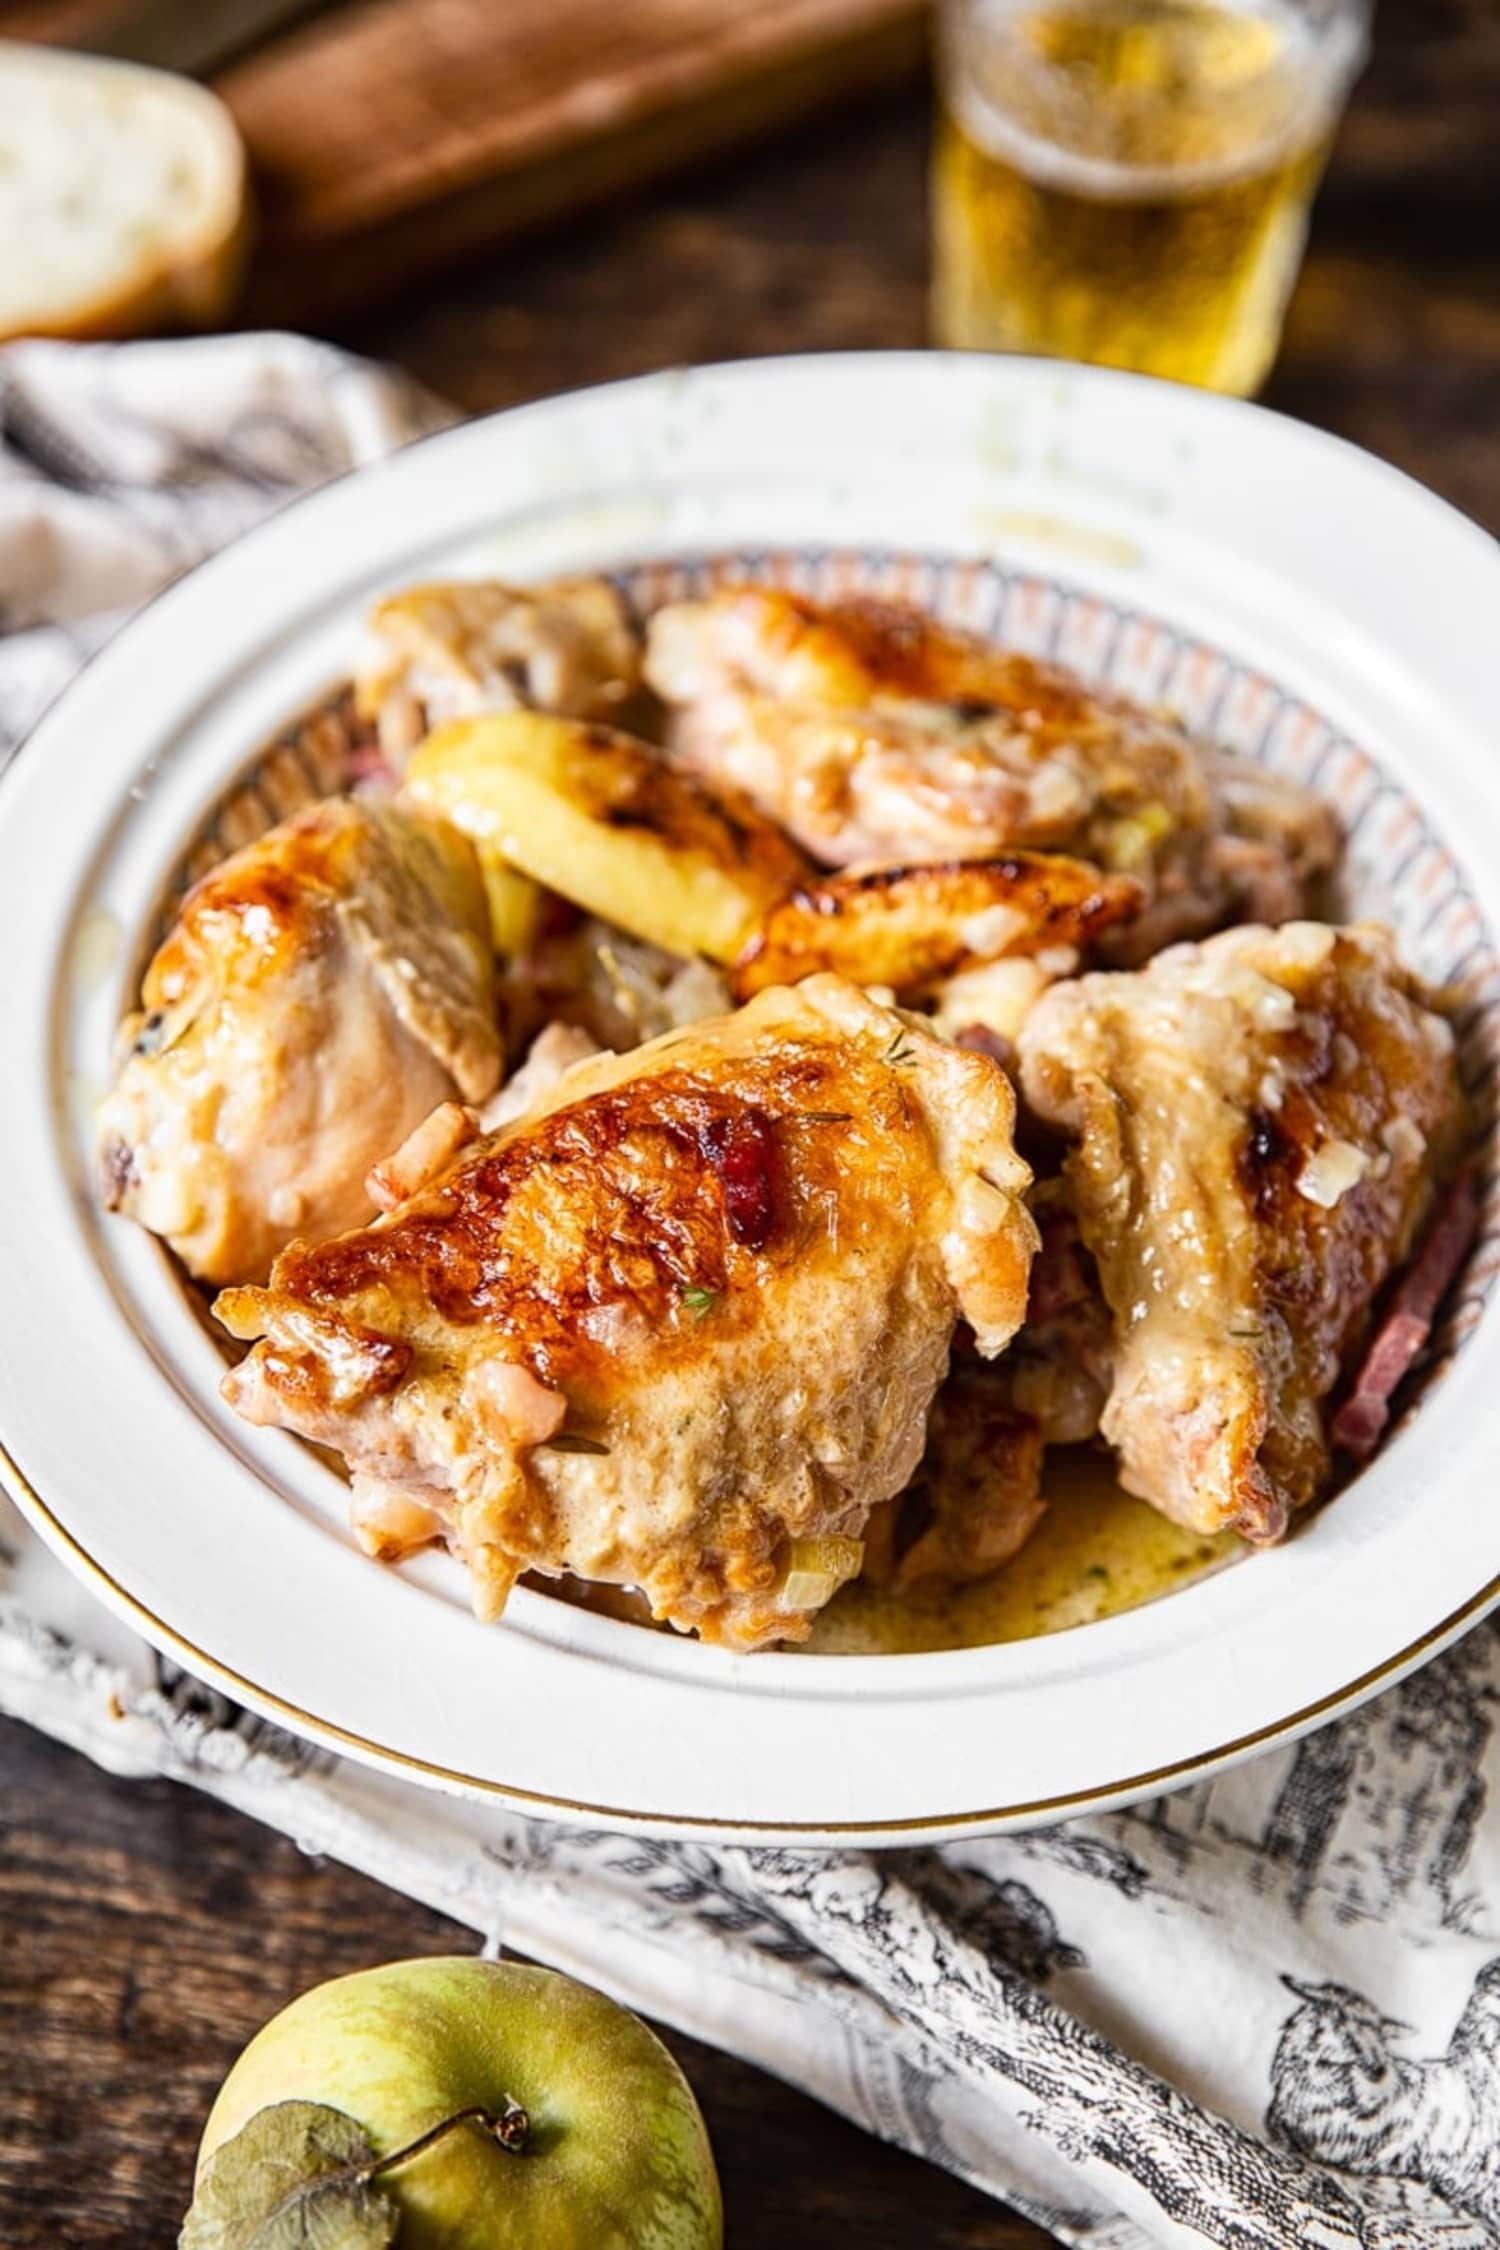 10 French Chicken Recipes to Make Right Now | Kitchn